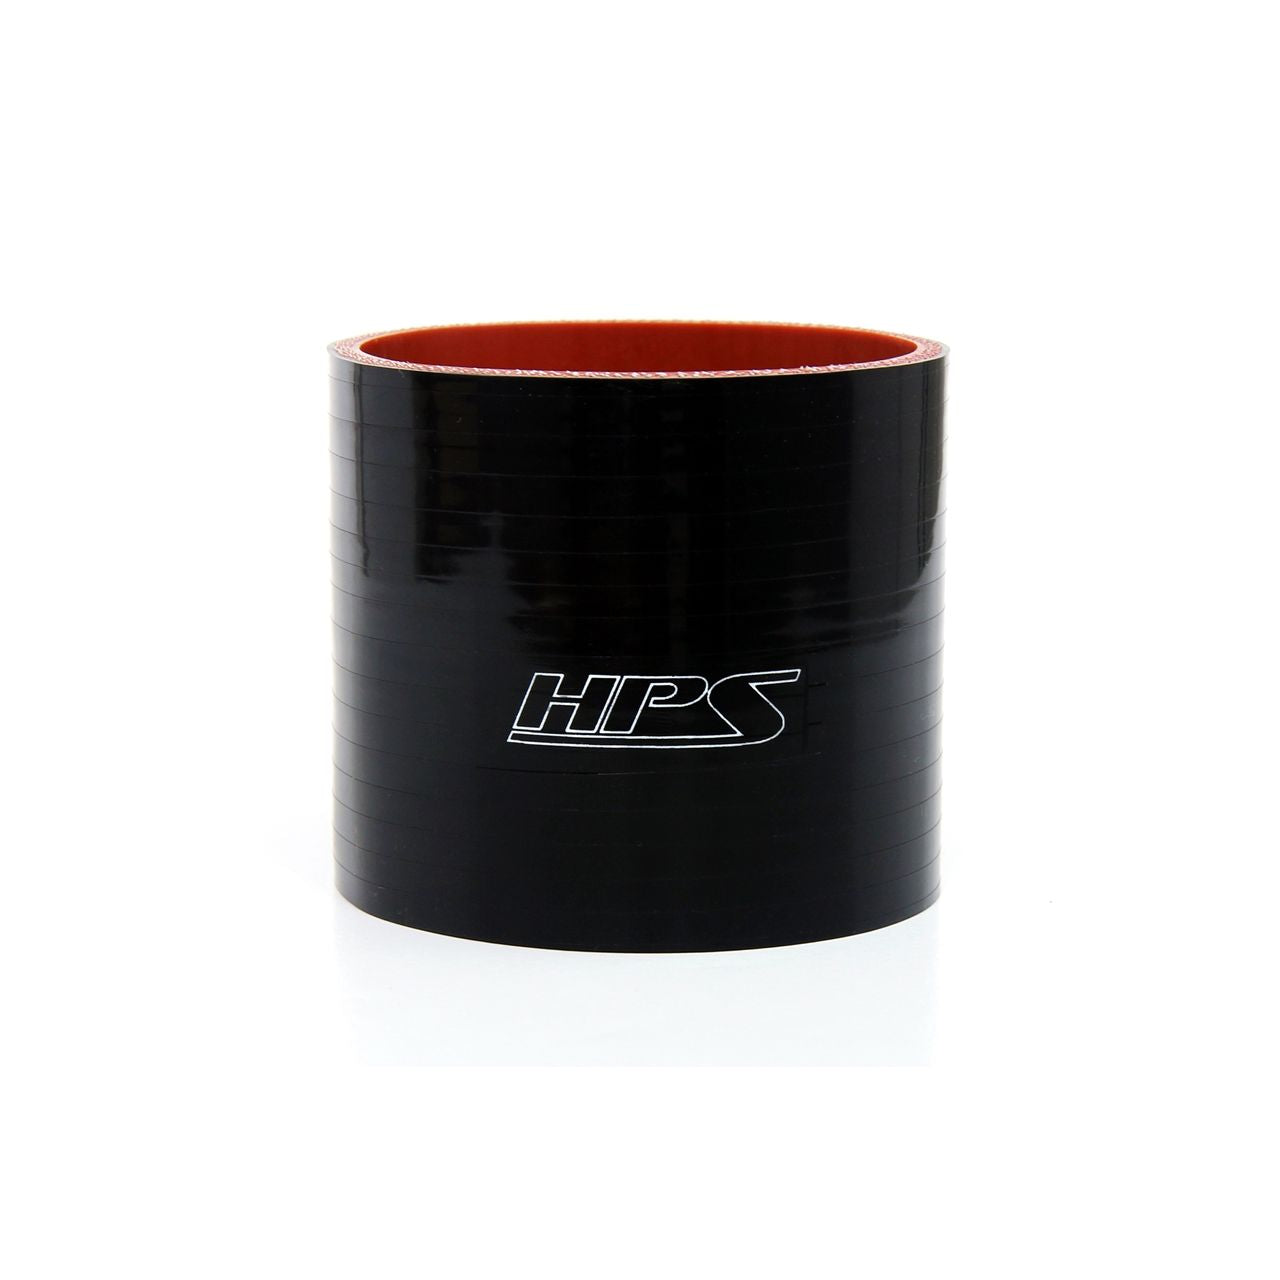 HPS 1-7/8" ID , 3" Long High Temp 4-ply Reinforced Silicone Straight Coupler Hose Black (48mm ID , 76mm Length)